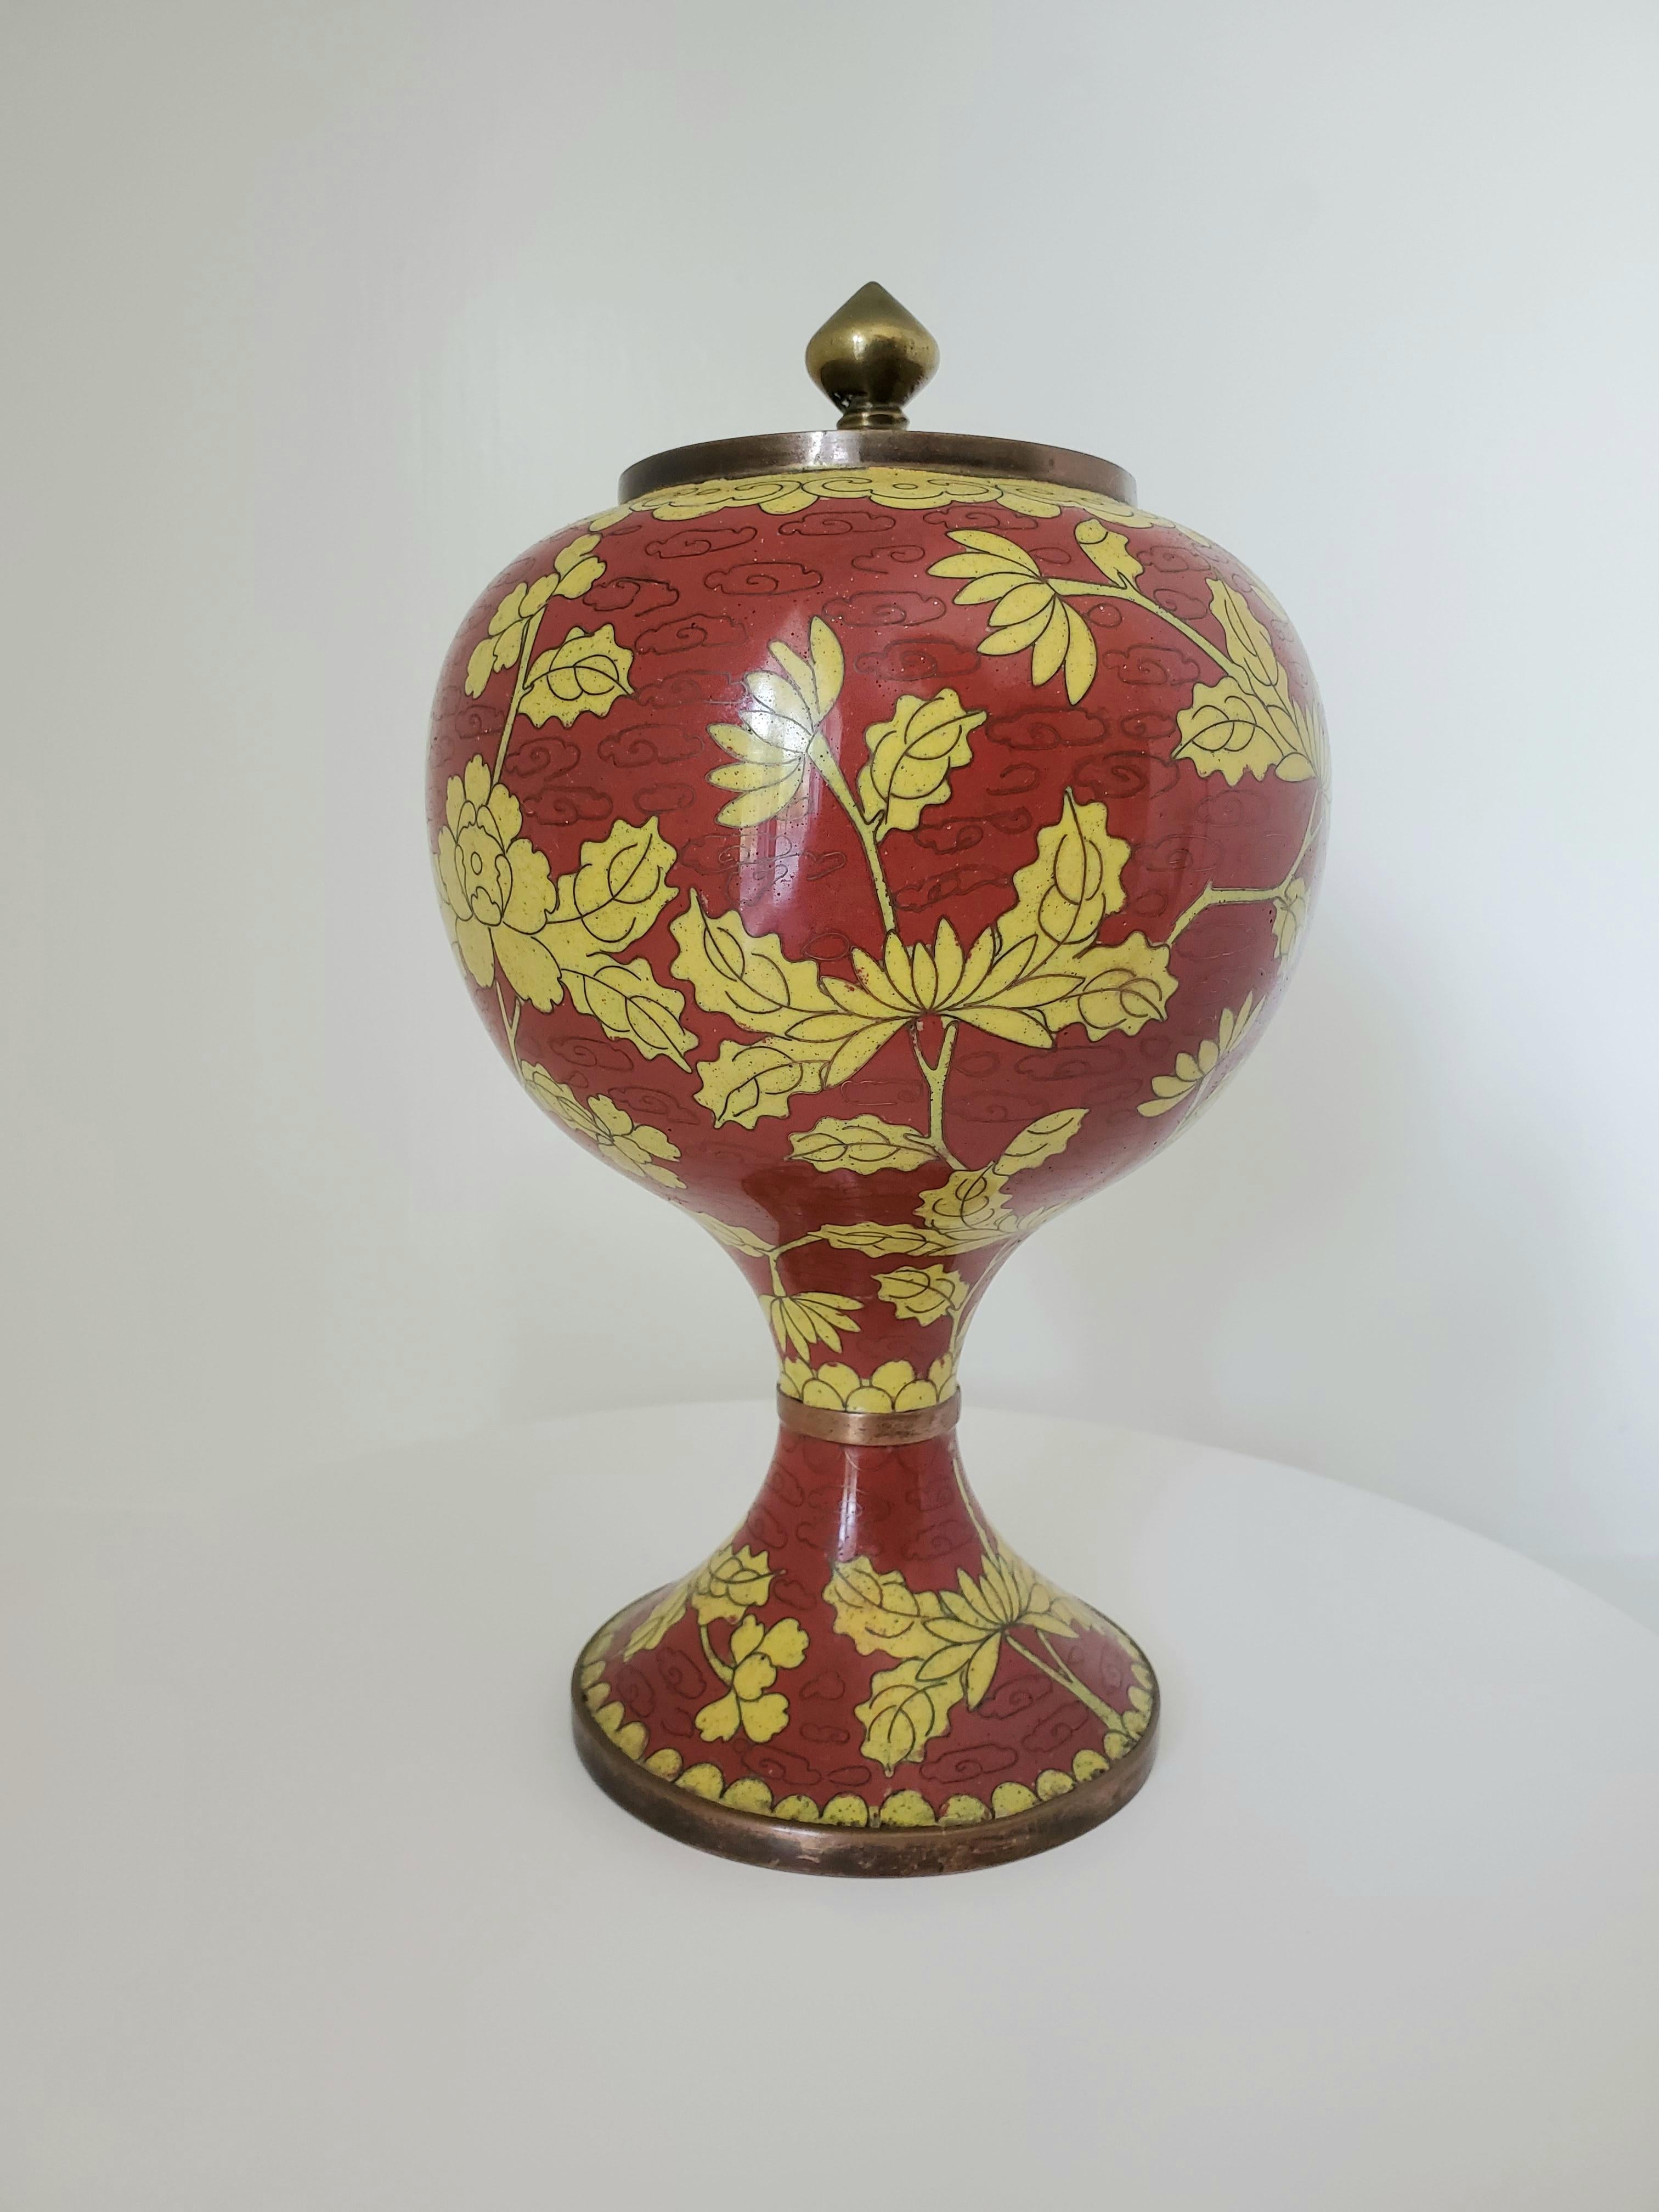 Qing 19th Century Chinese Cloisonné Urn or Lidded Vase Red with Yellow Floral Motif